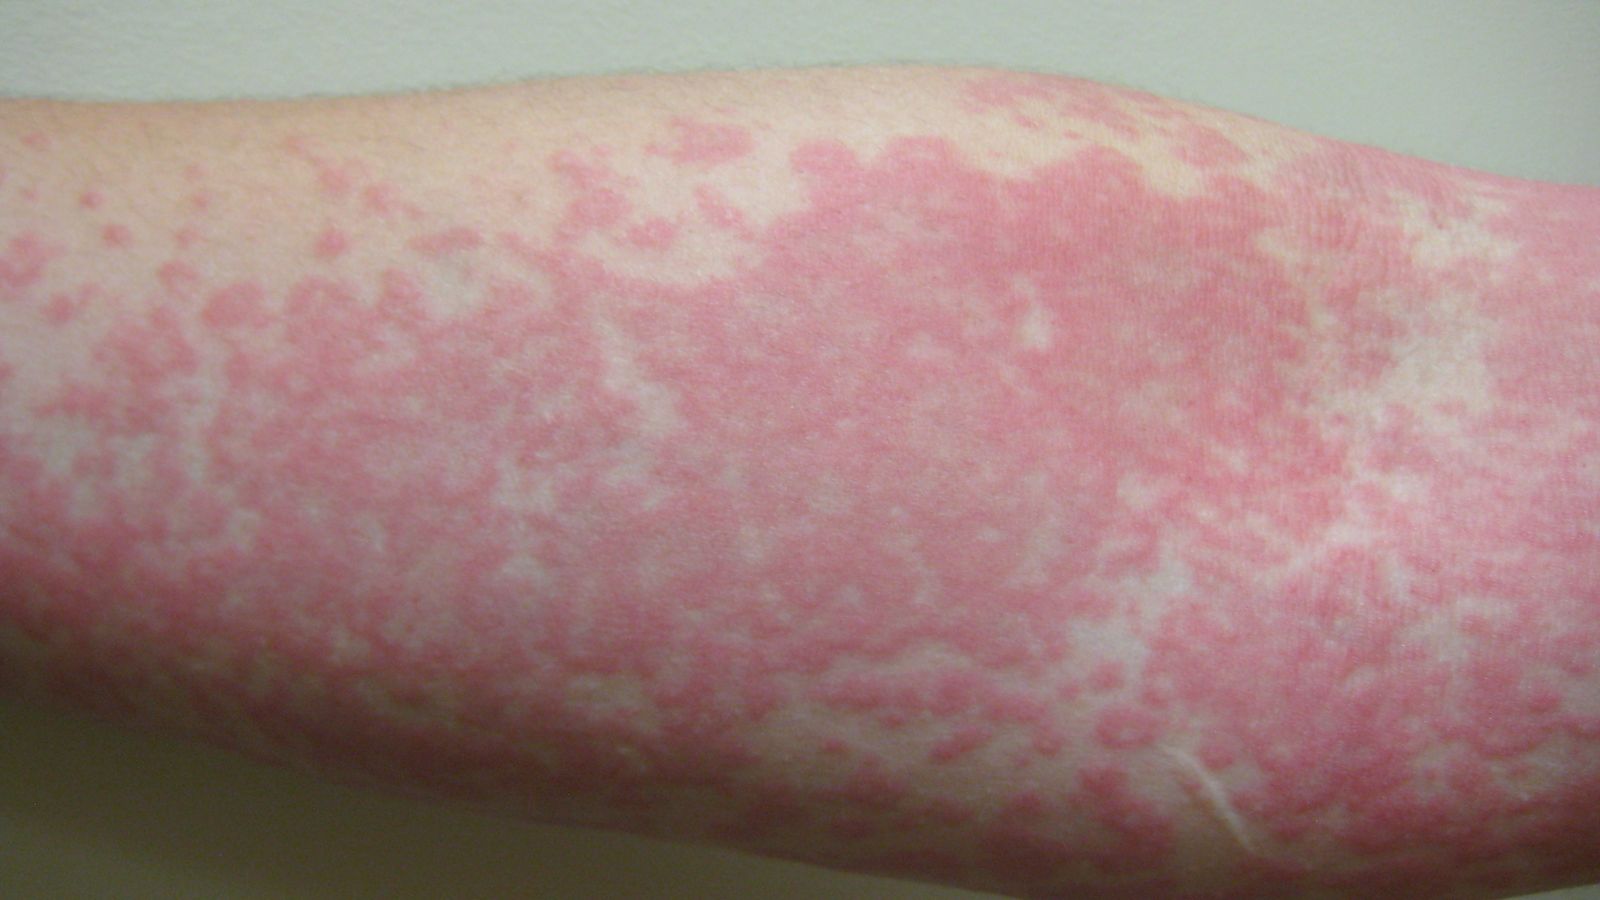 A hive-type rash, or urticaria, is among the three skin conditions that can be the only symptom of COVID-19. 